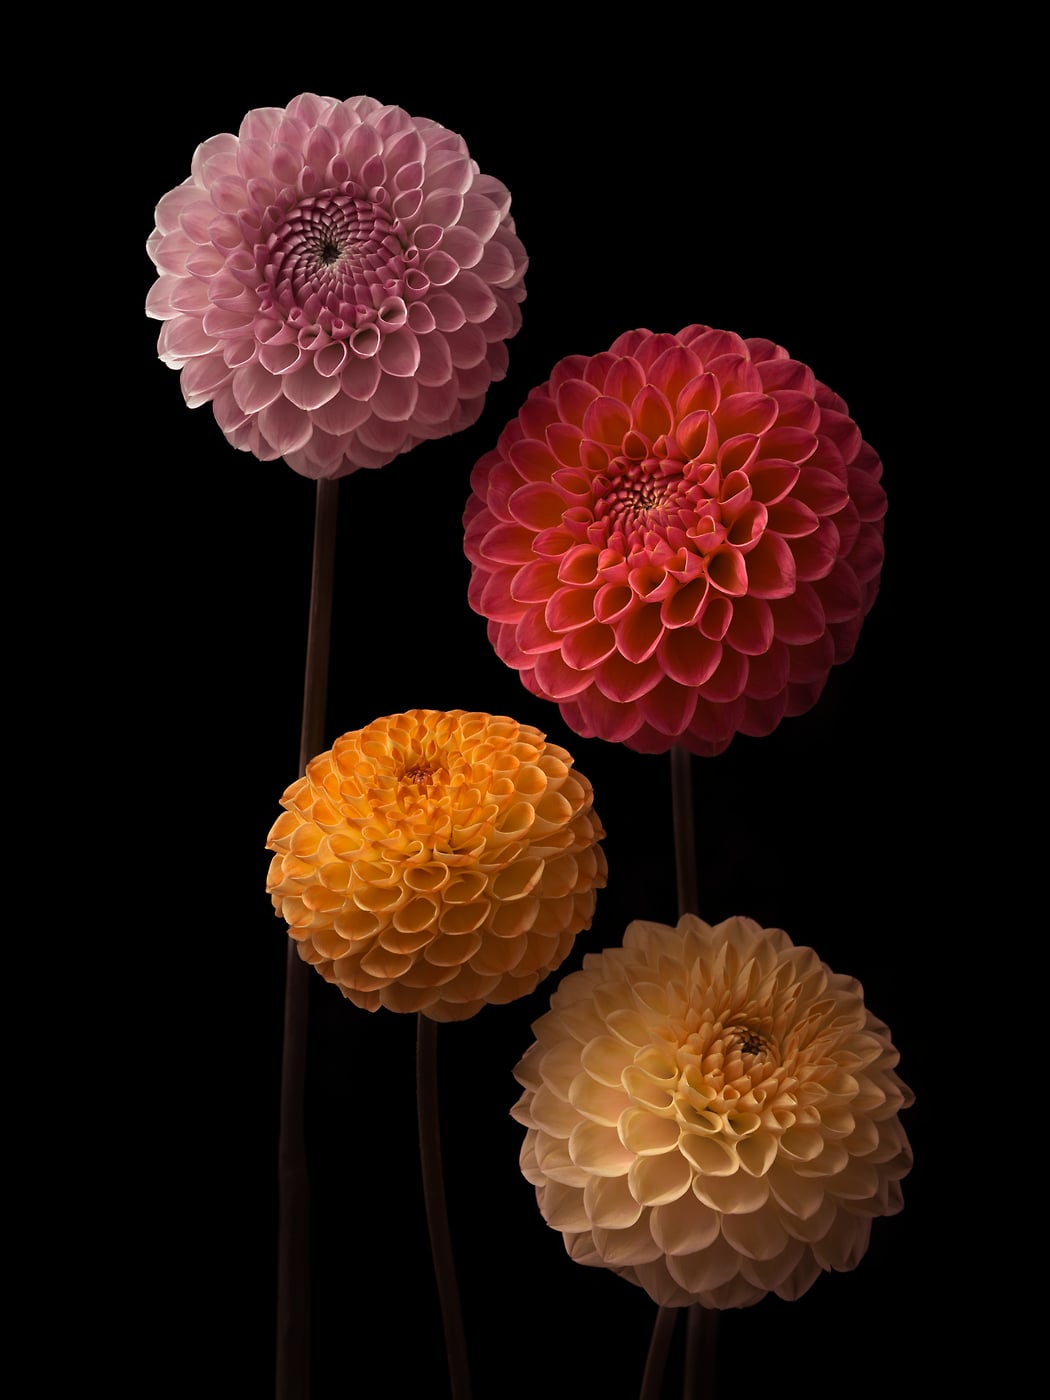 407 megapixels! A very high resolution, large-format VAST photo print of colorful Pompon dahlia flowers on a dark background; dark fine art flower photo created by Assaf Frank.